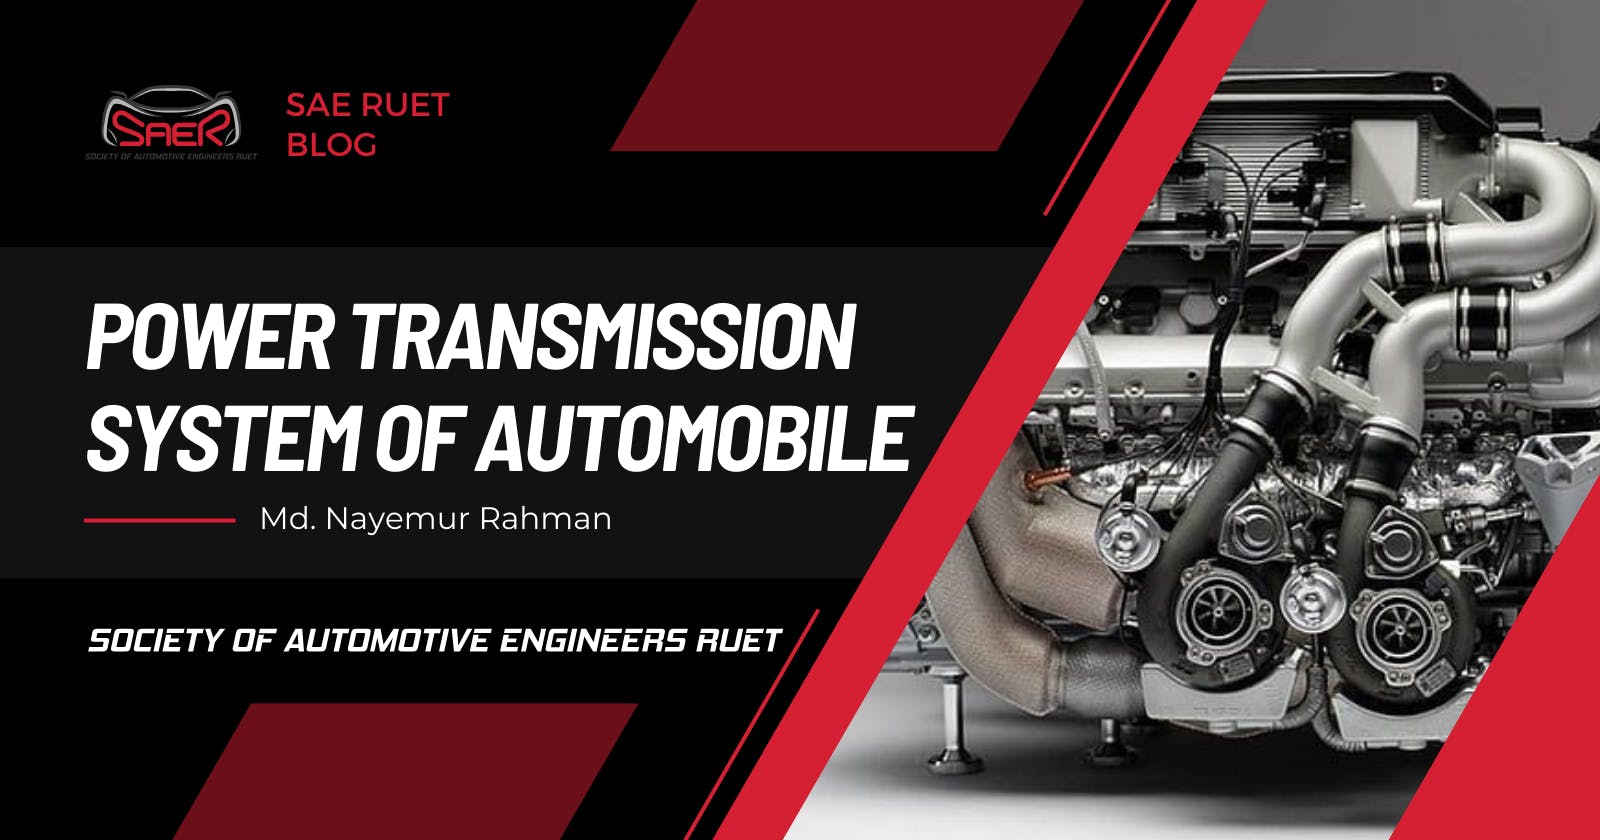 Power Transmission System of Automobile